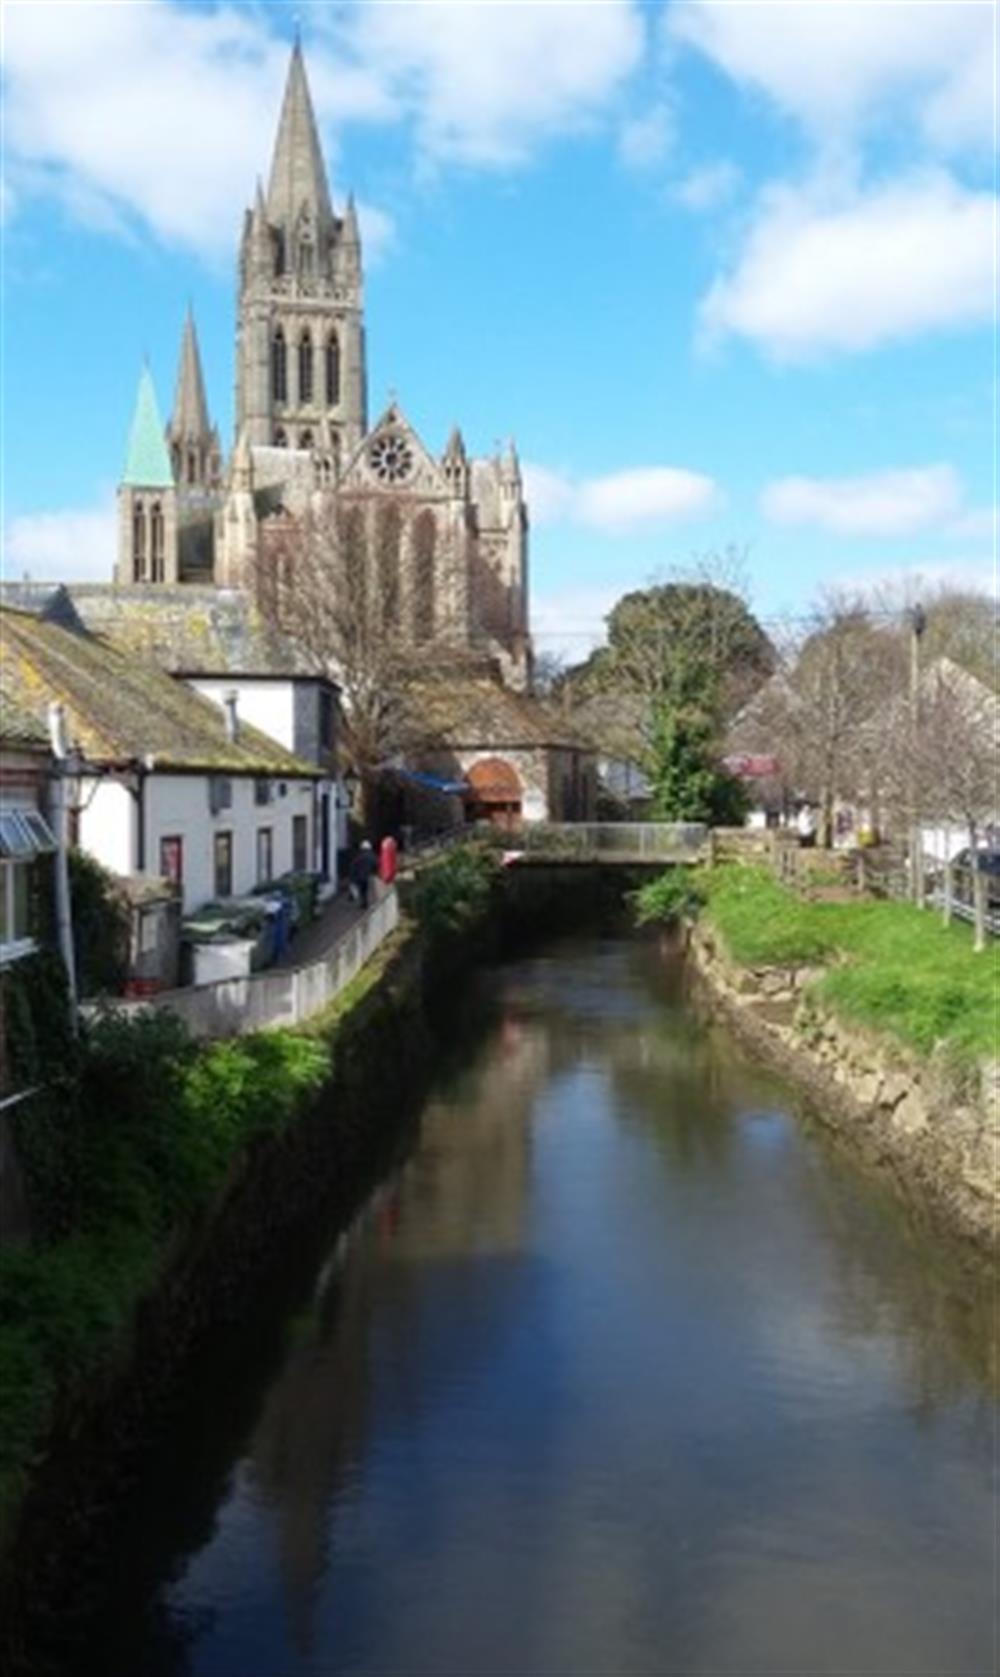 Cornwall's capital, the beautiful Truro, is just half an hour away by car.